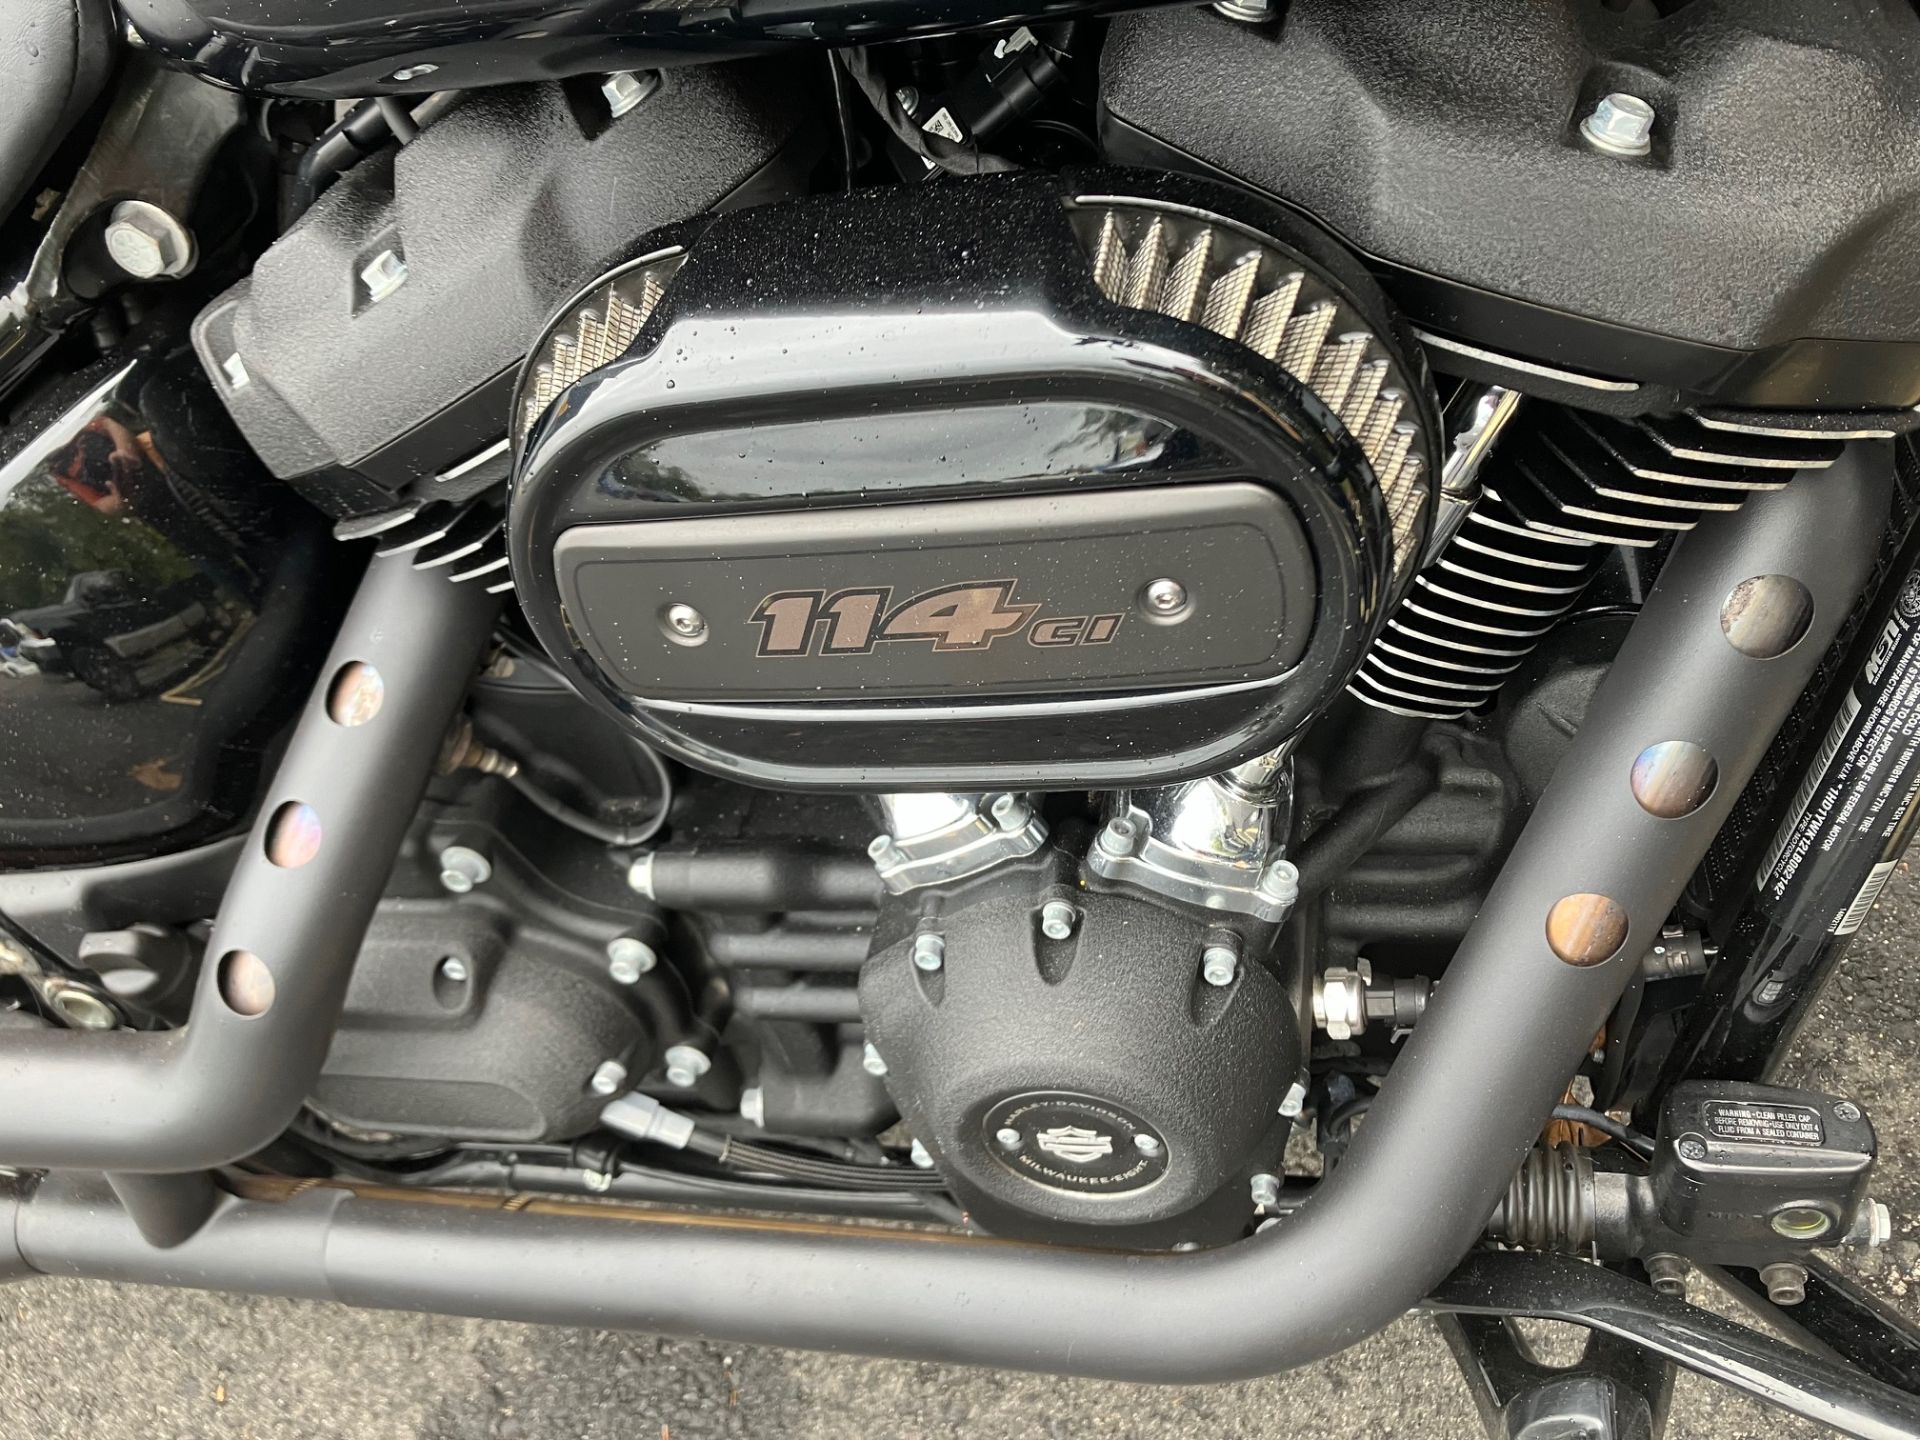 2020 Harley-Davidson LOW RIDER S in West Long Branch, New Jersey - Photo 8